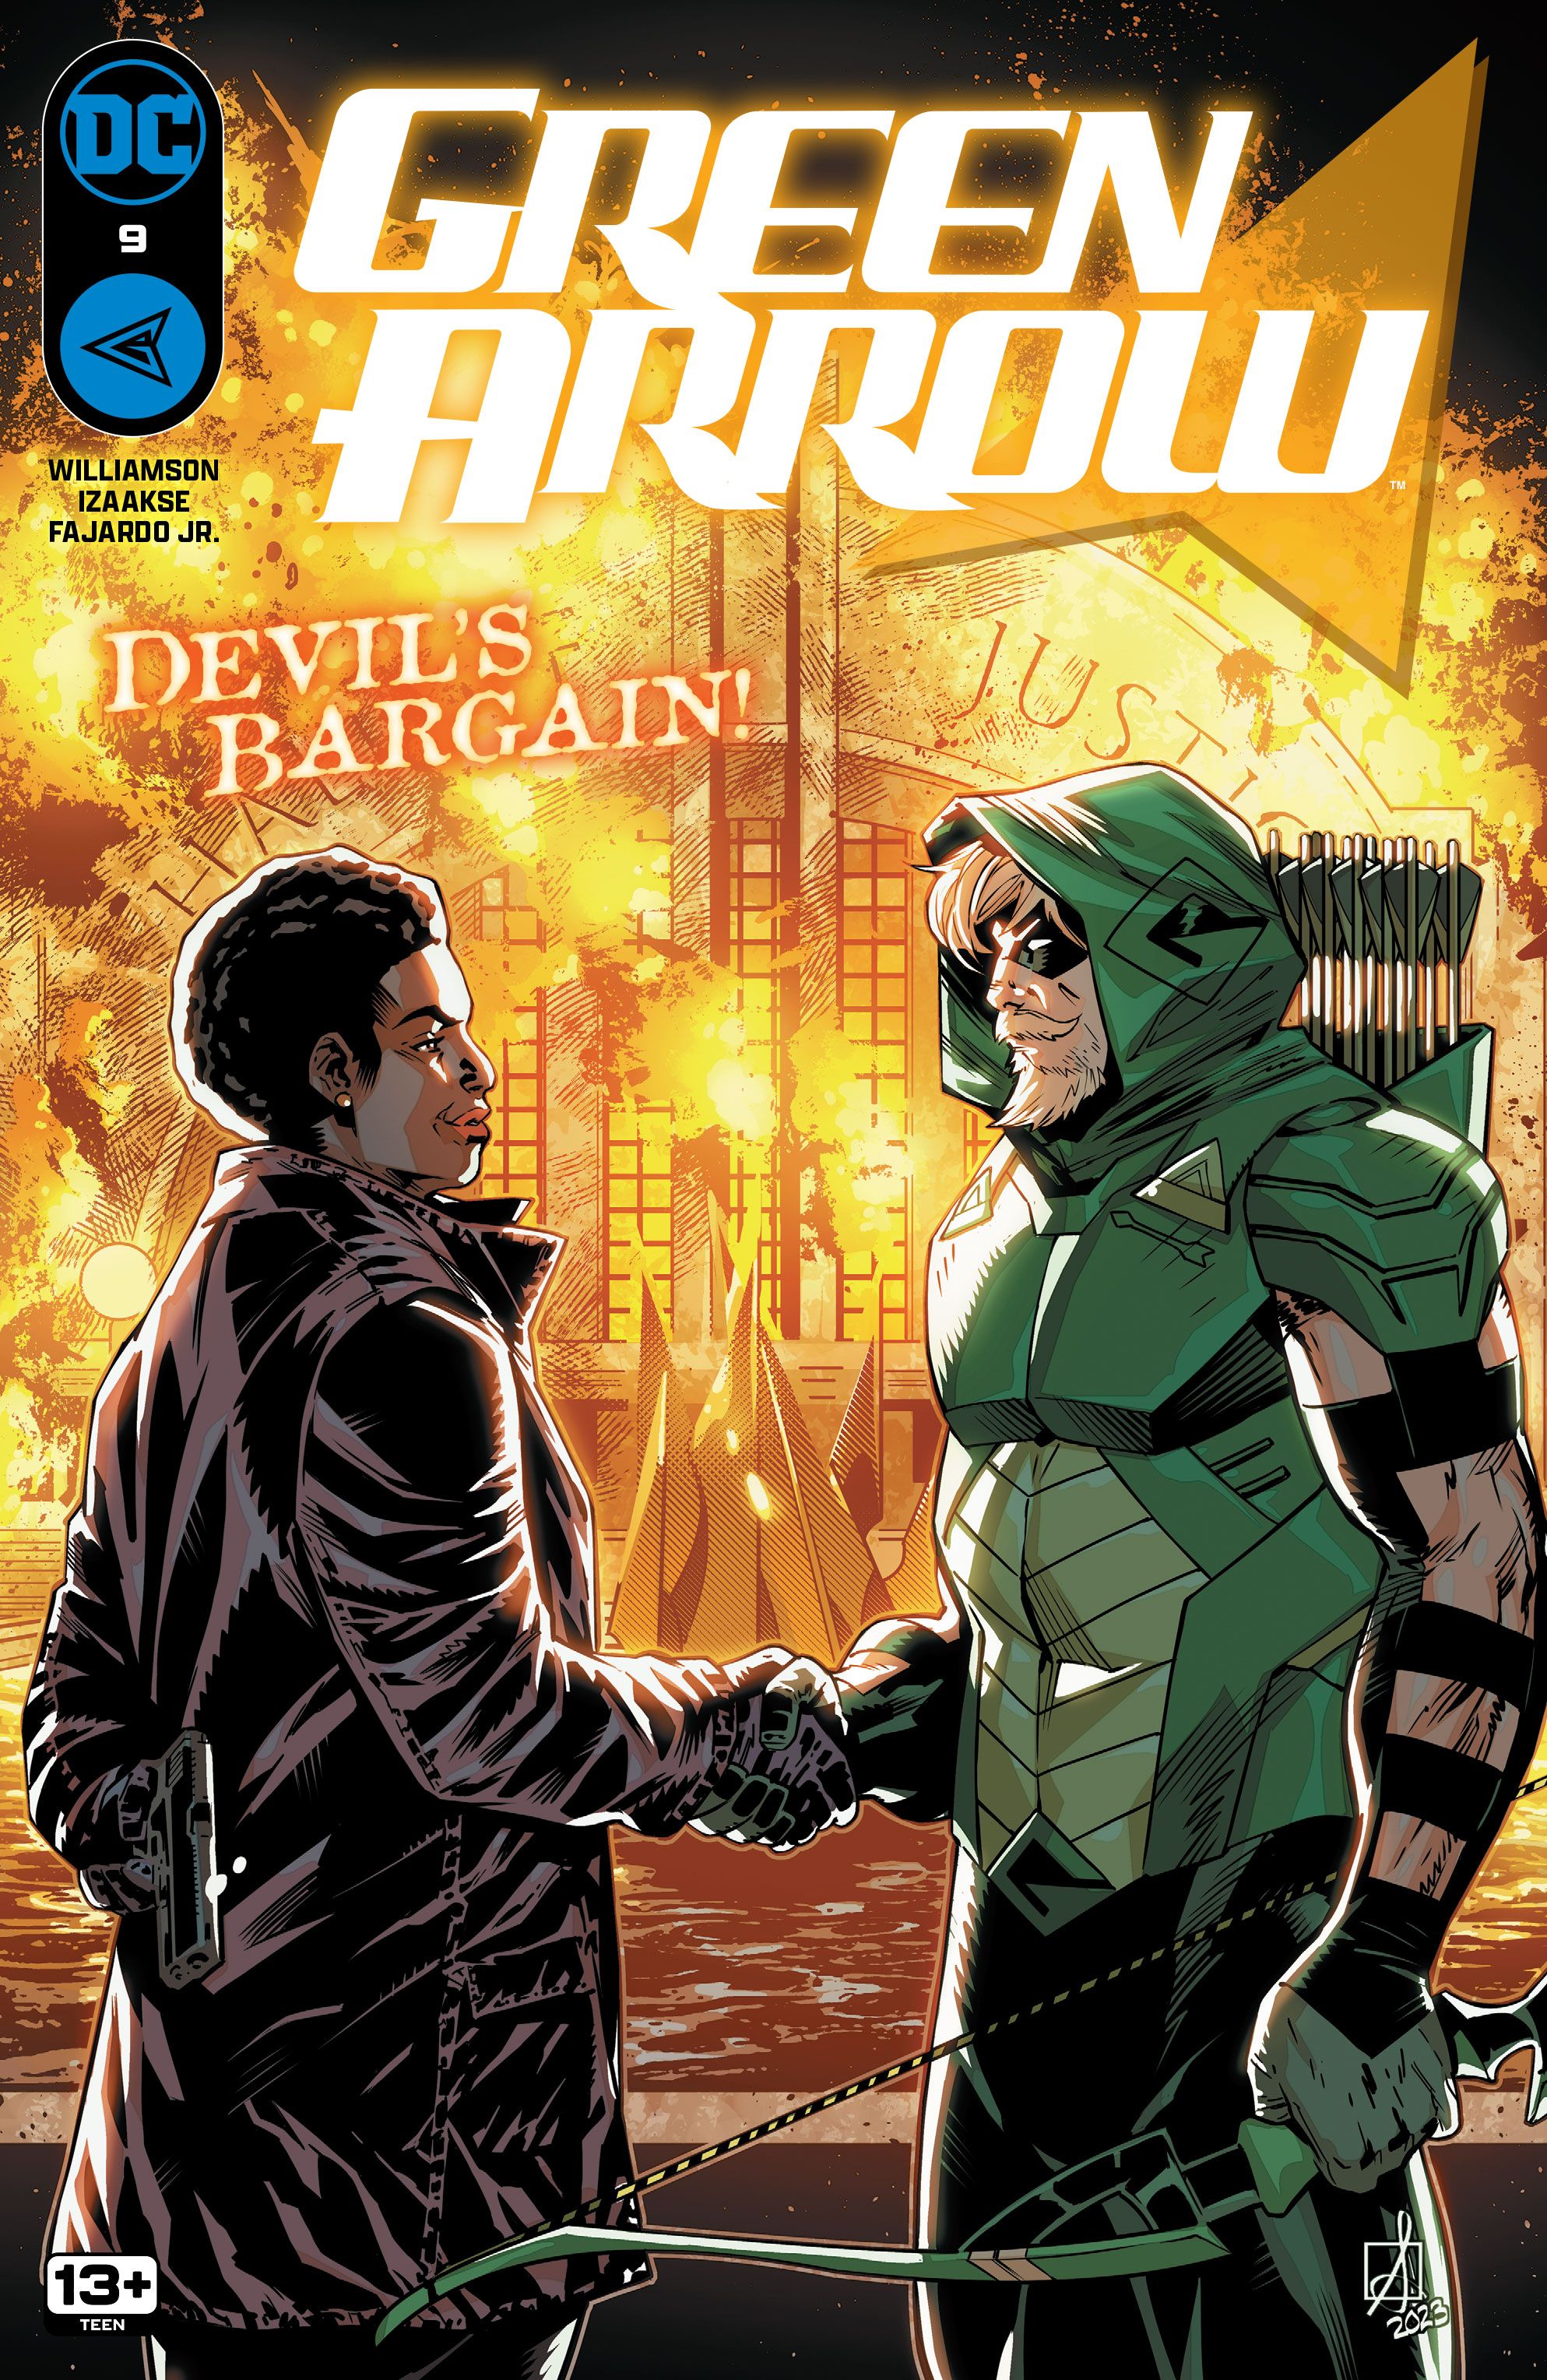 Green Arrow 9 Main Cover: Amanda Waller and Green Arrow shaking hands in front of a burning Hall of Justice.